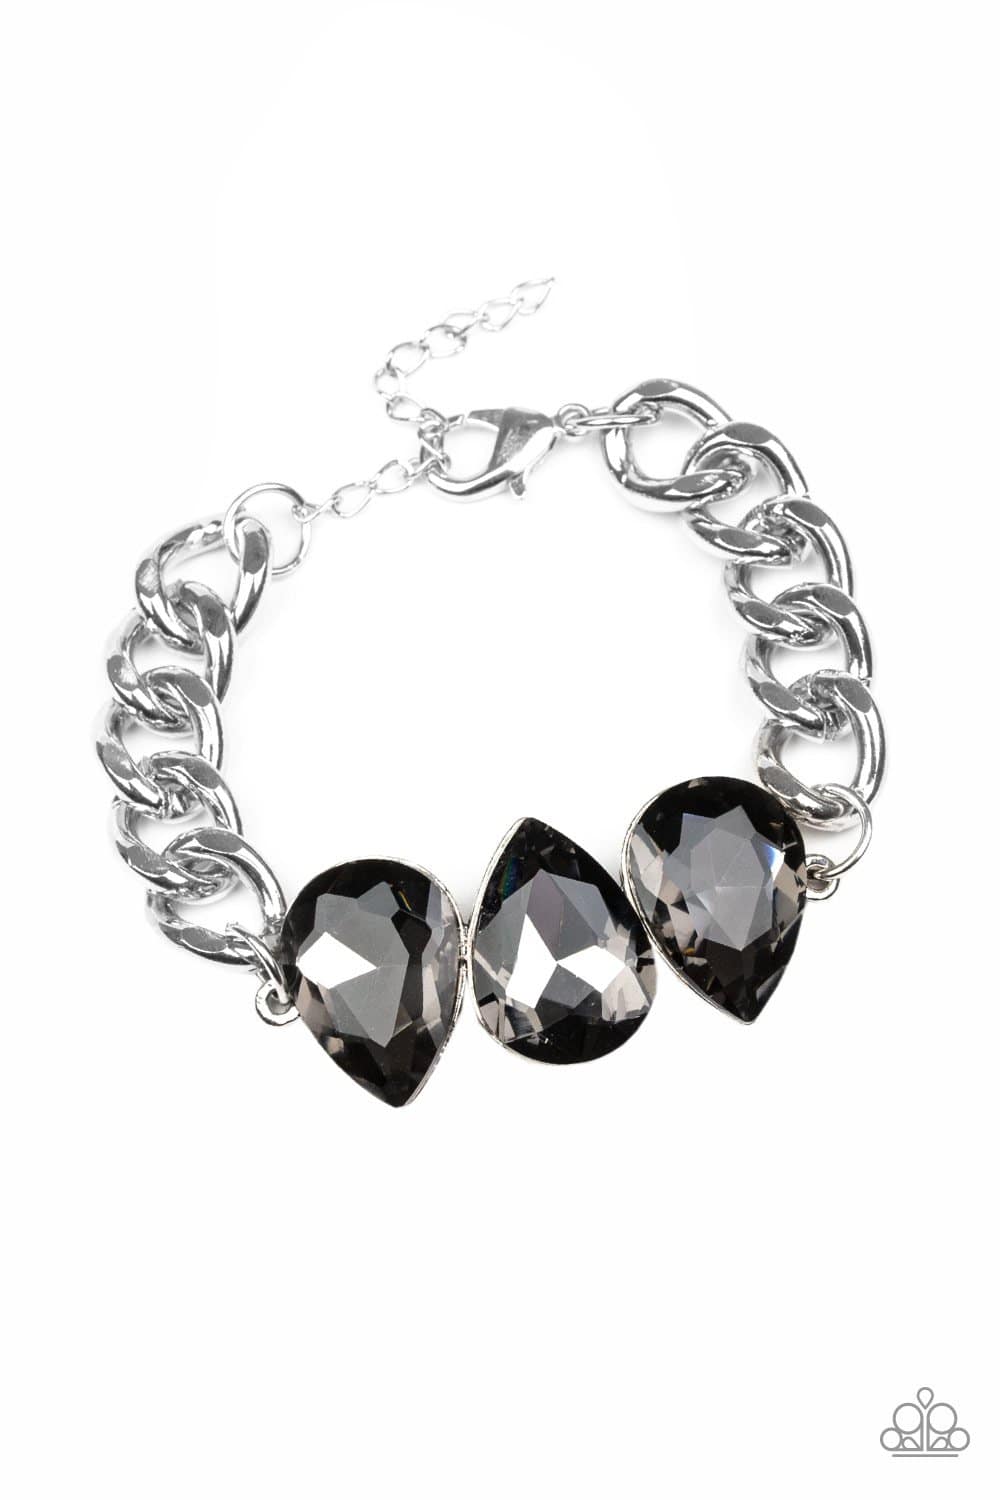 Bring Your Own Bling - Silver Bracelet - Paparazzi Accessories - GlaMarous Titi Jewels